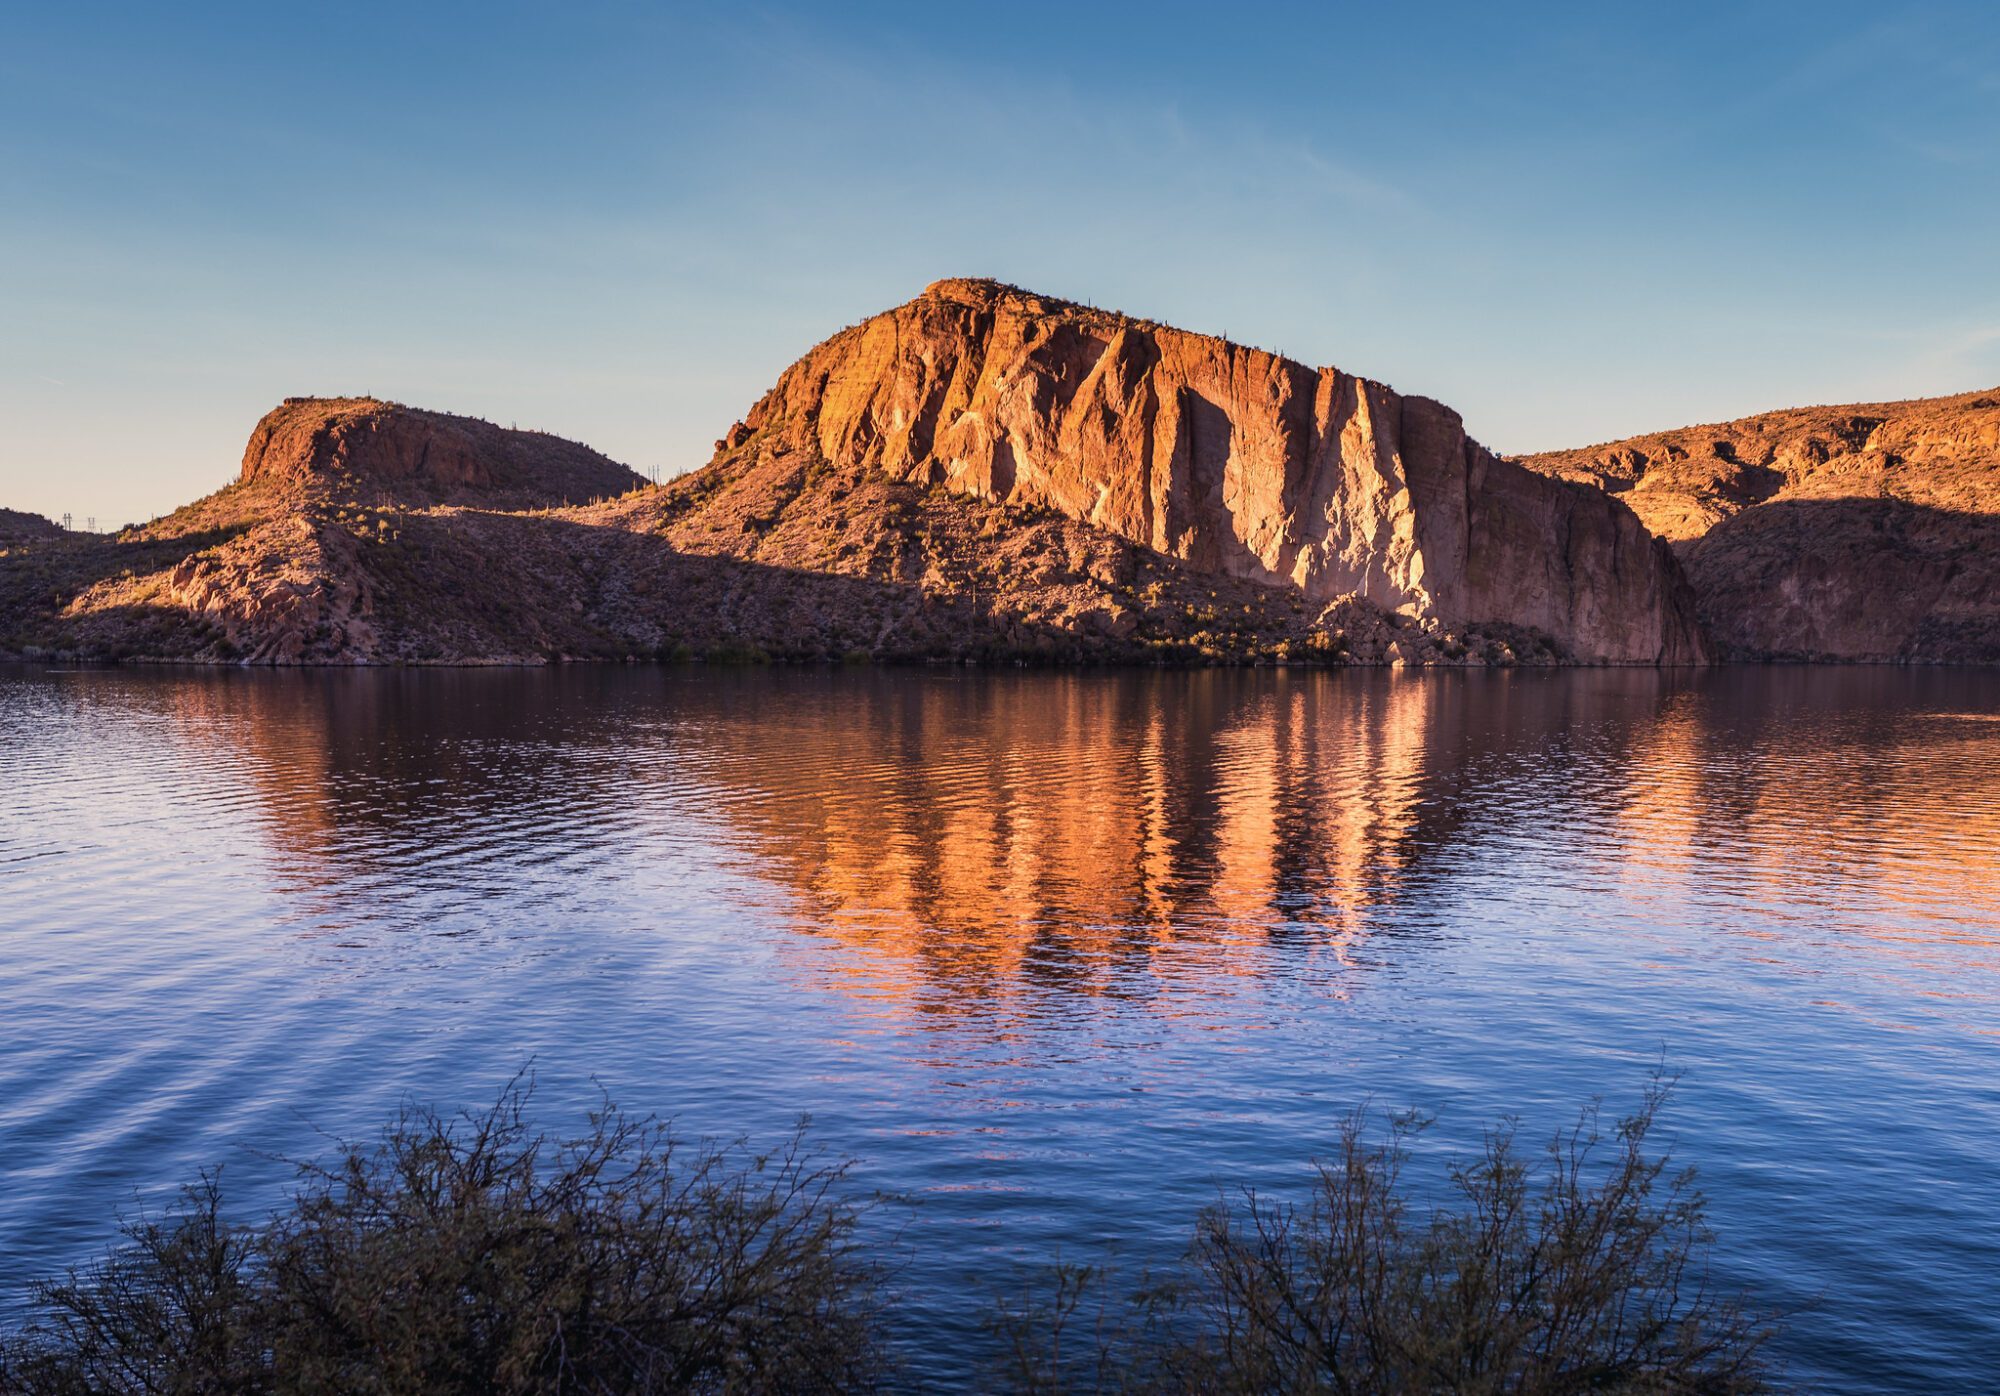 Canyon Lake in the Superstition Mountains